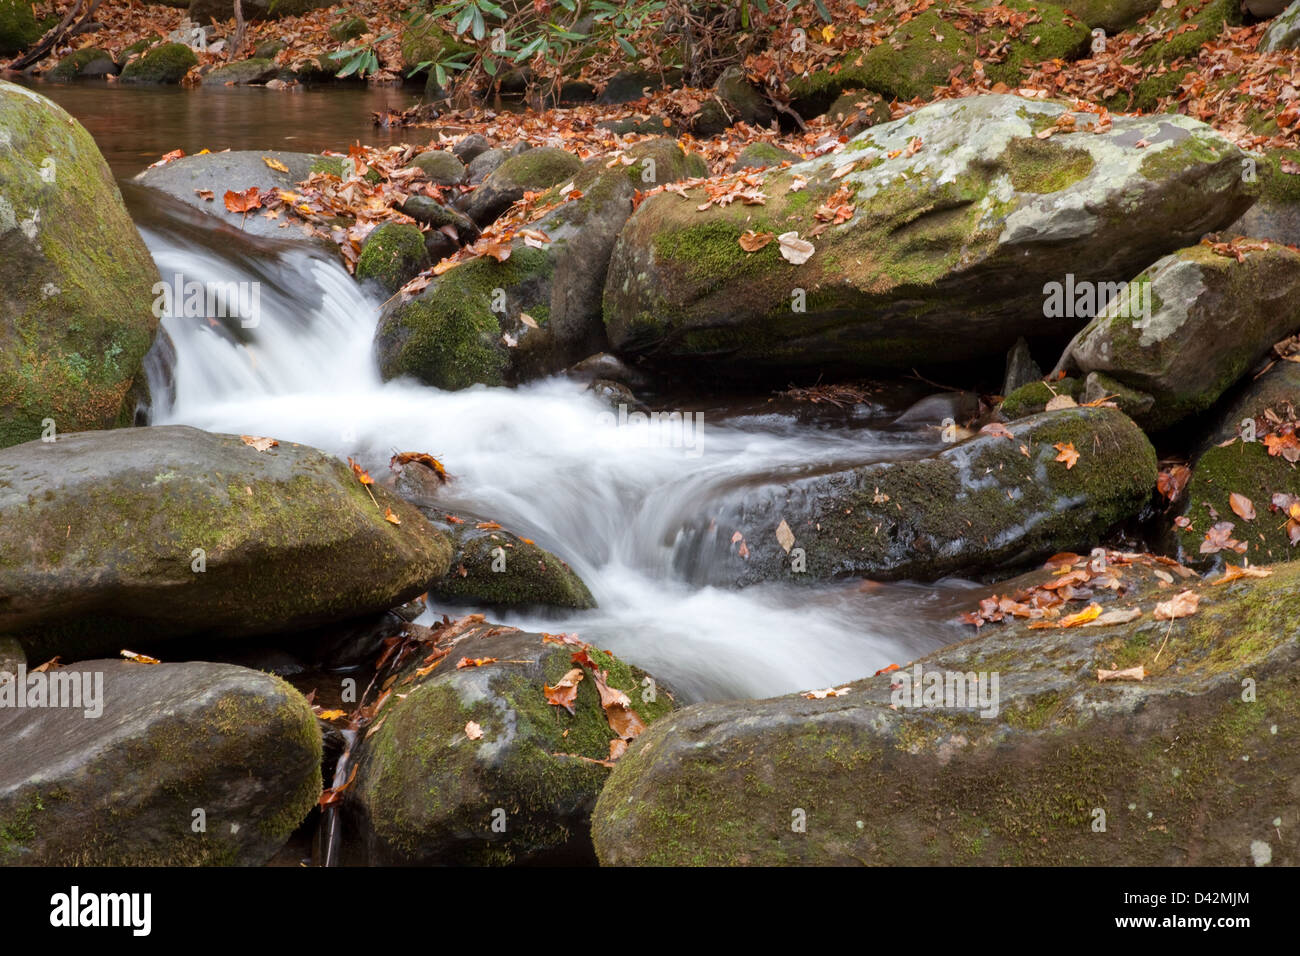 Mountain stream cascading by moss covered rocks with a fall leaf covering of the stones, a tourist restful delight Stock Photo